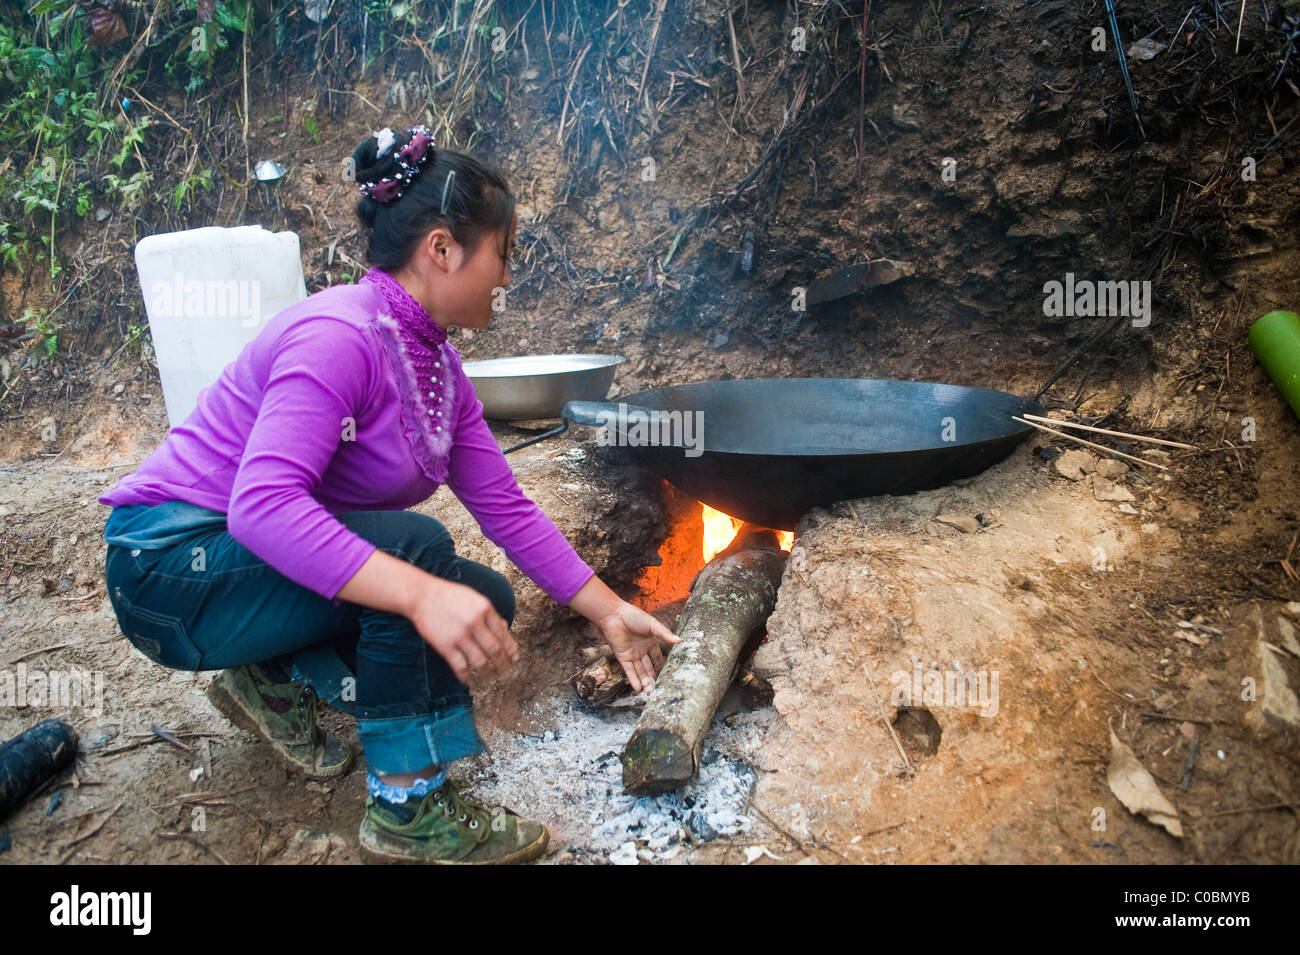 Miao people working on a Taxus / Yew tree plantation project Stock Photo